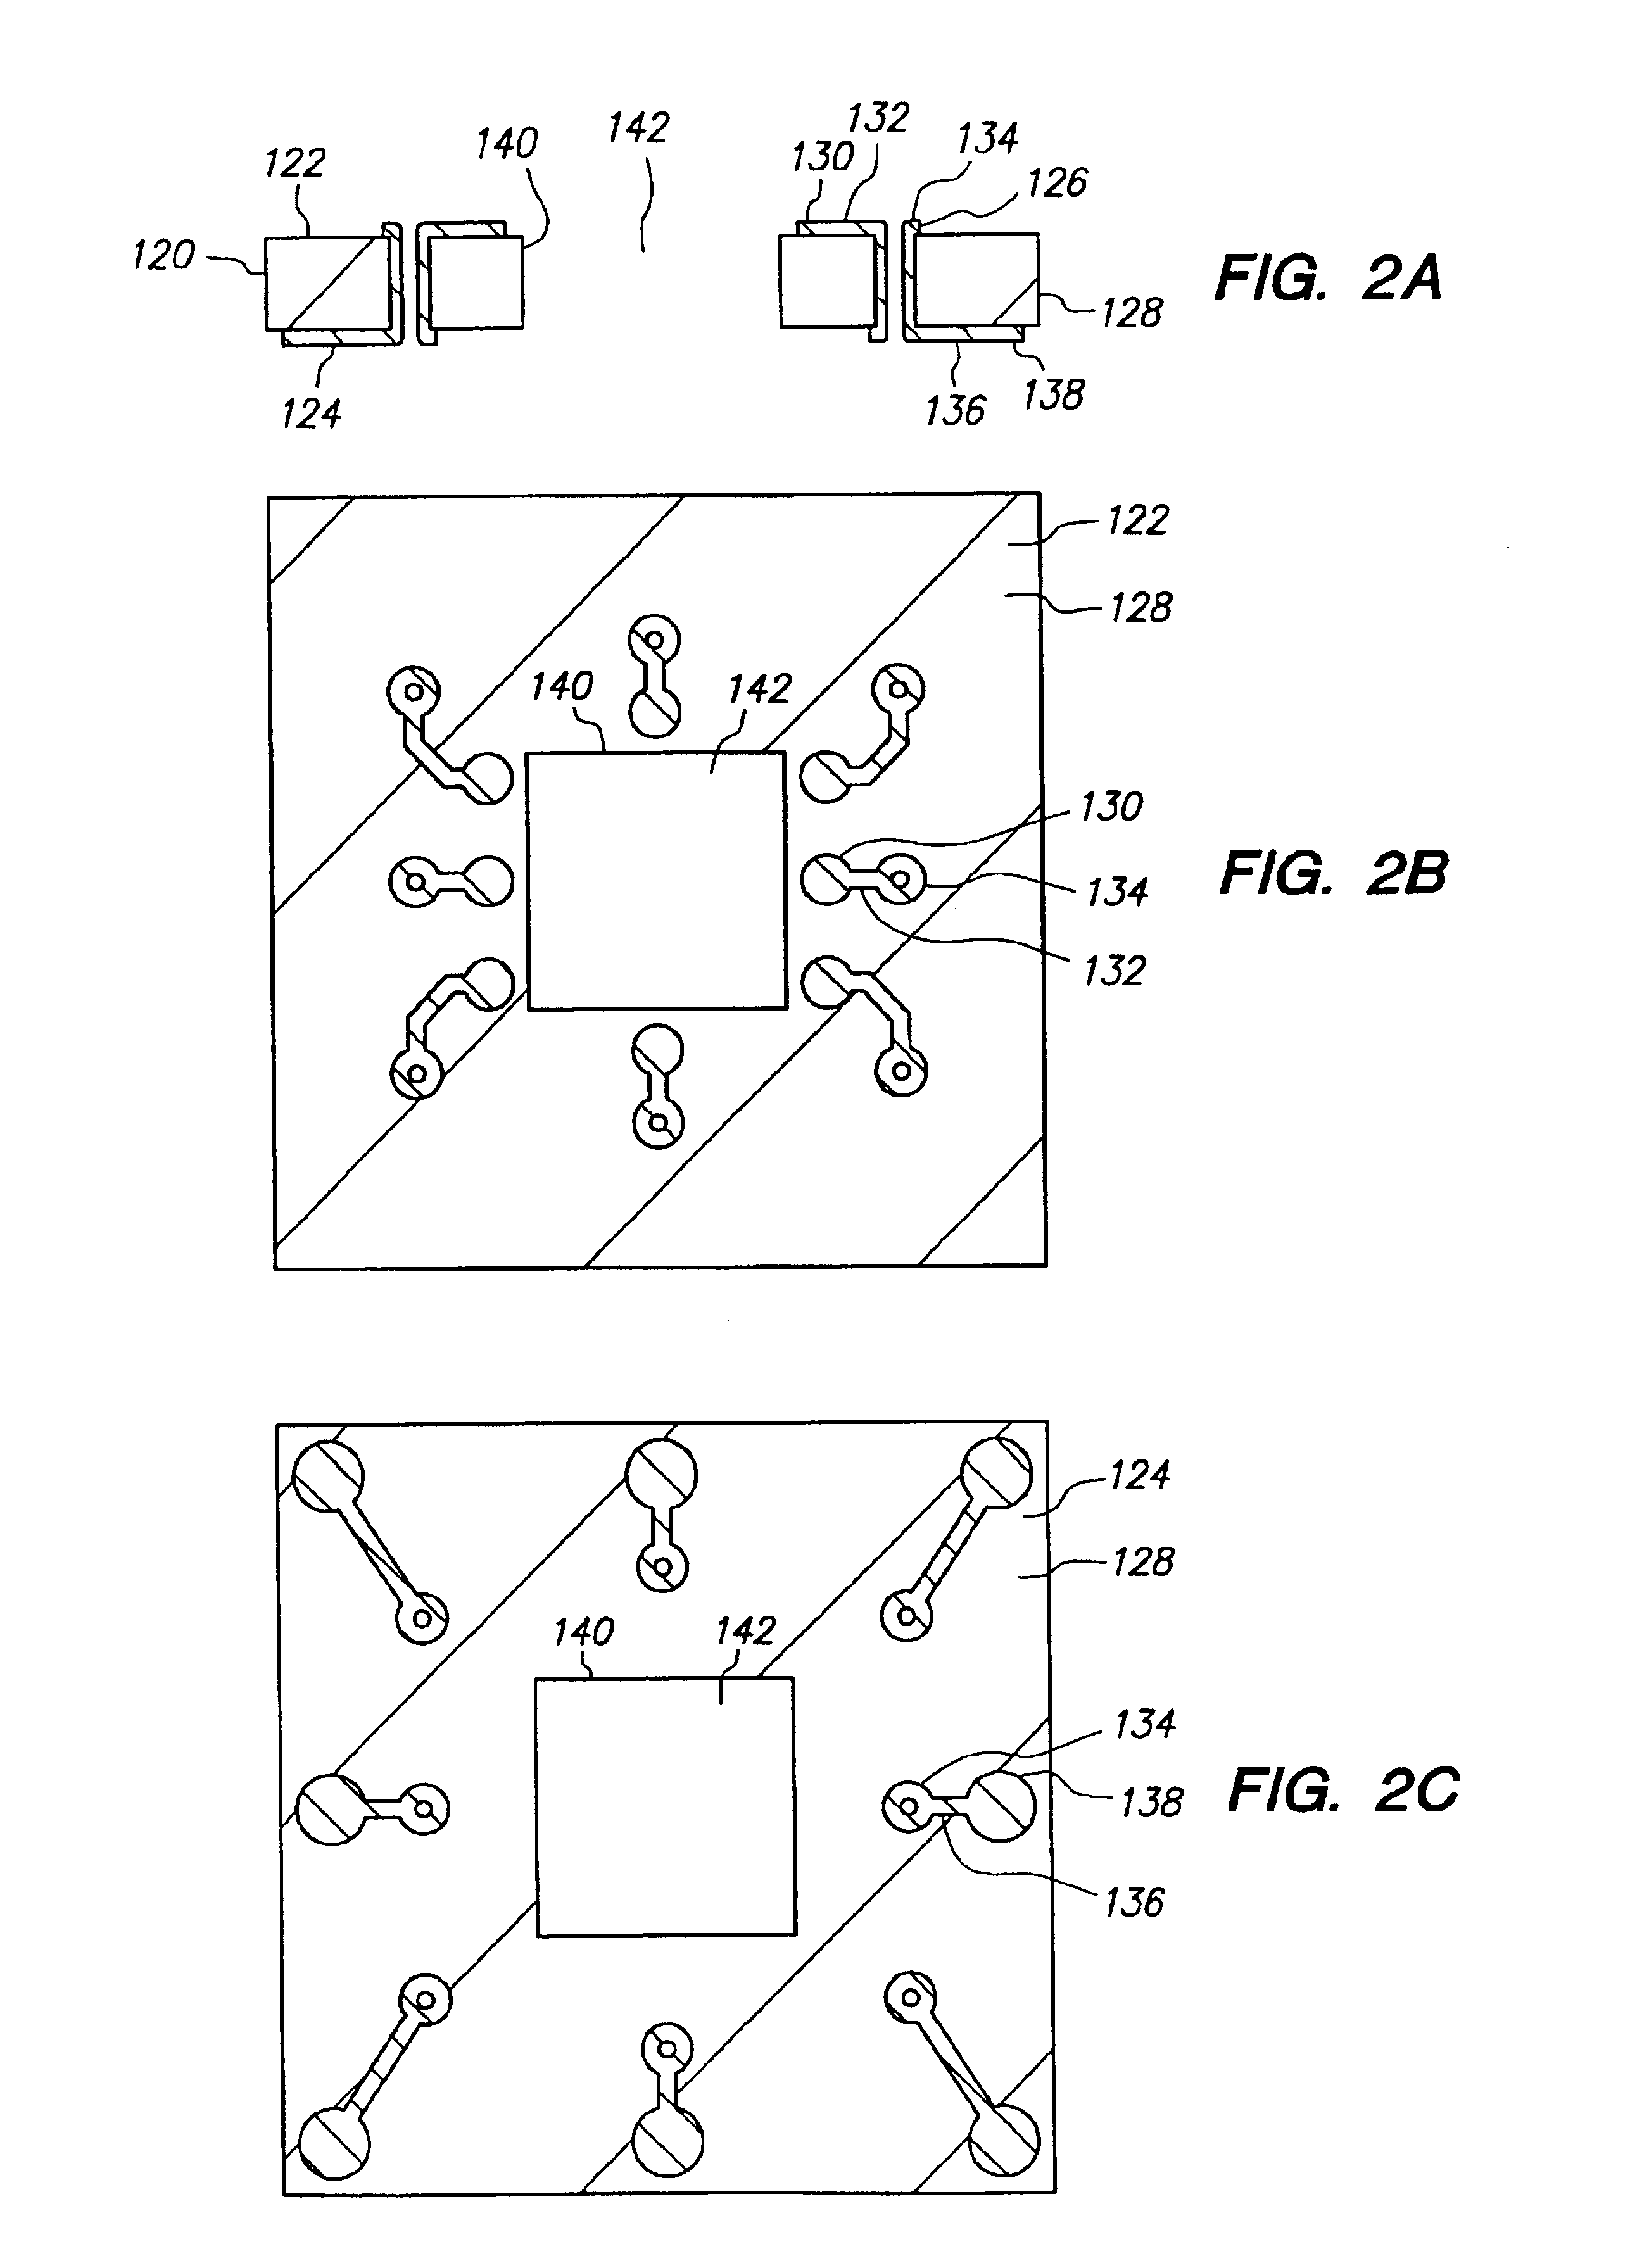 Semiconductor chip assembly with chip in substrate cavity